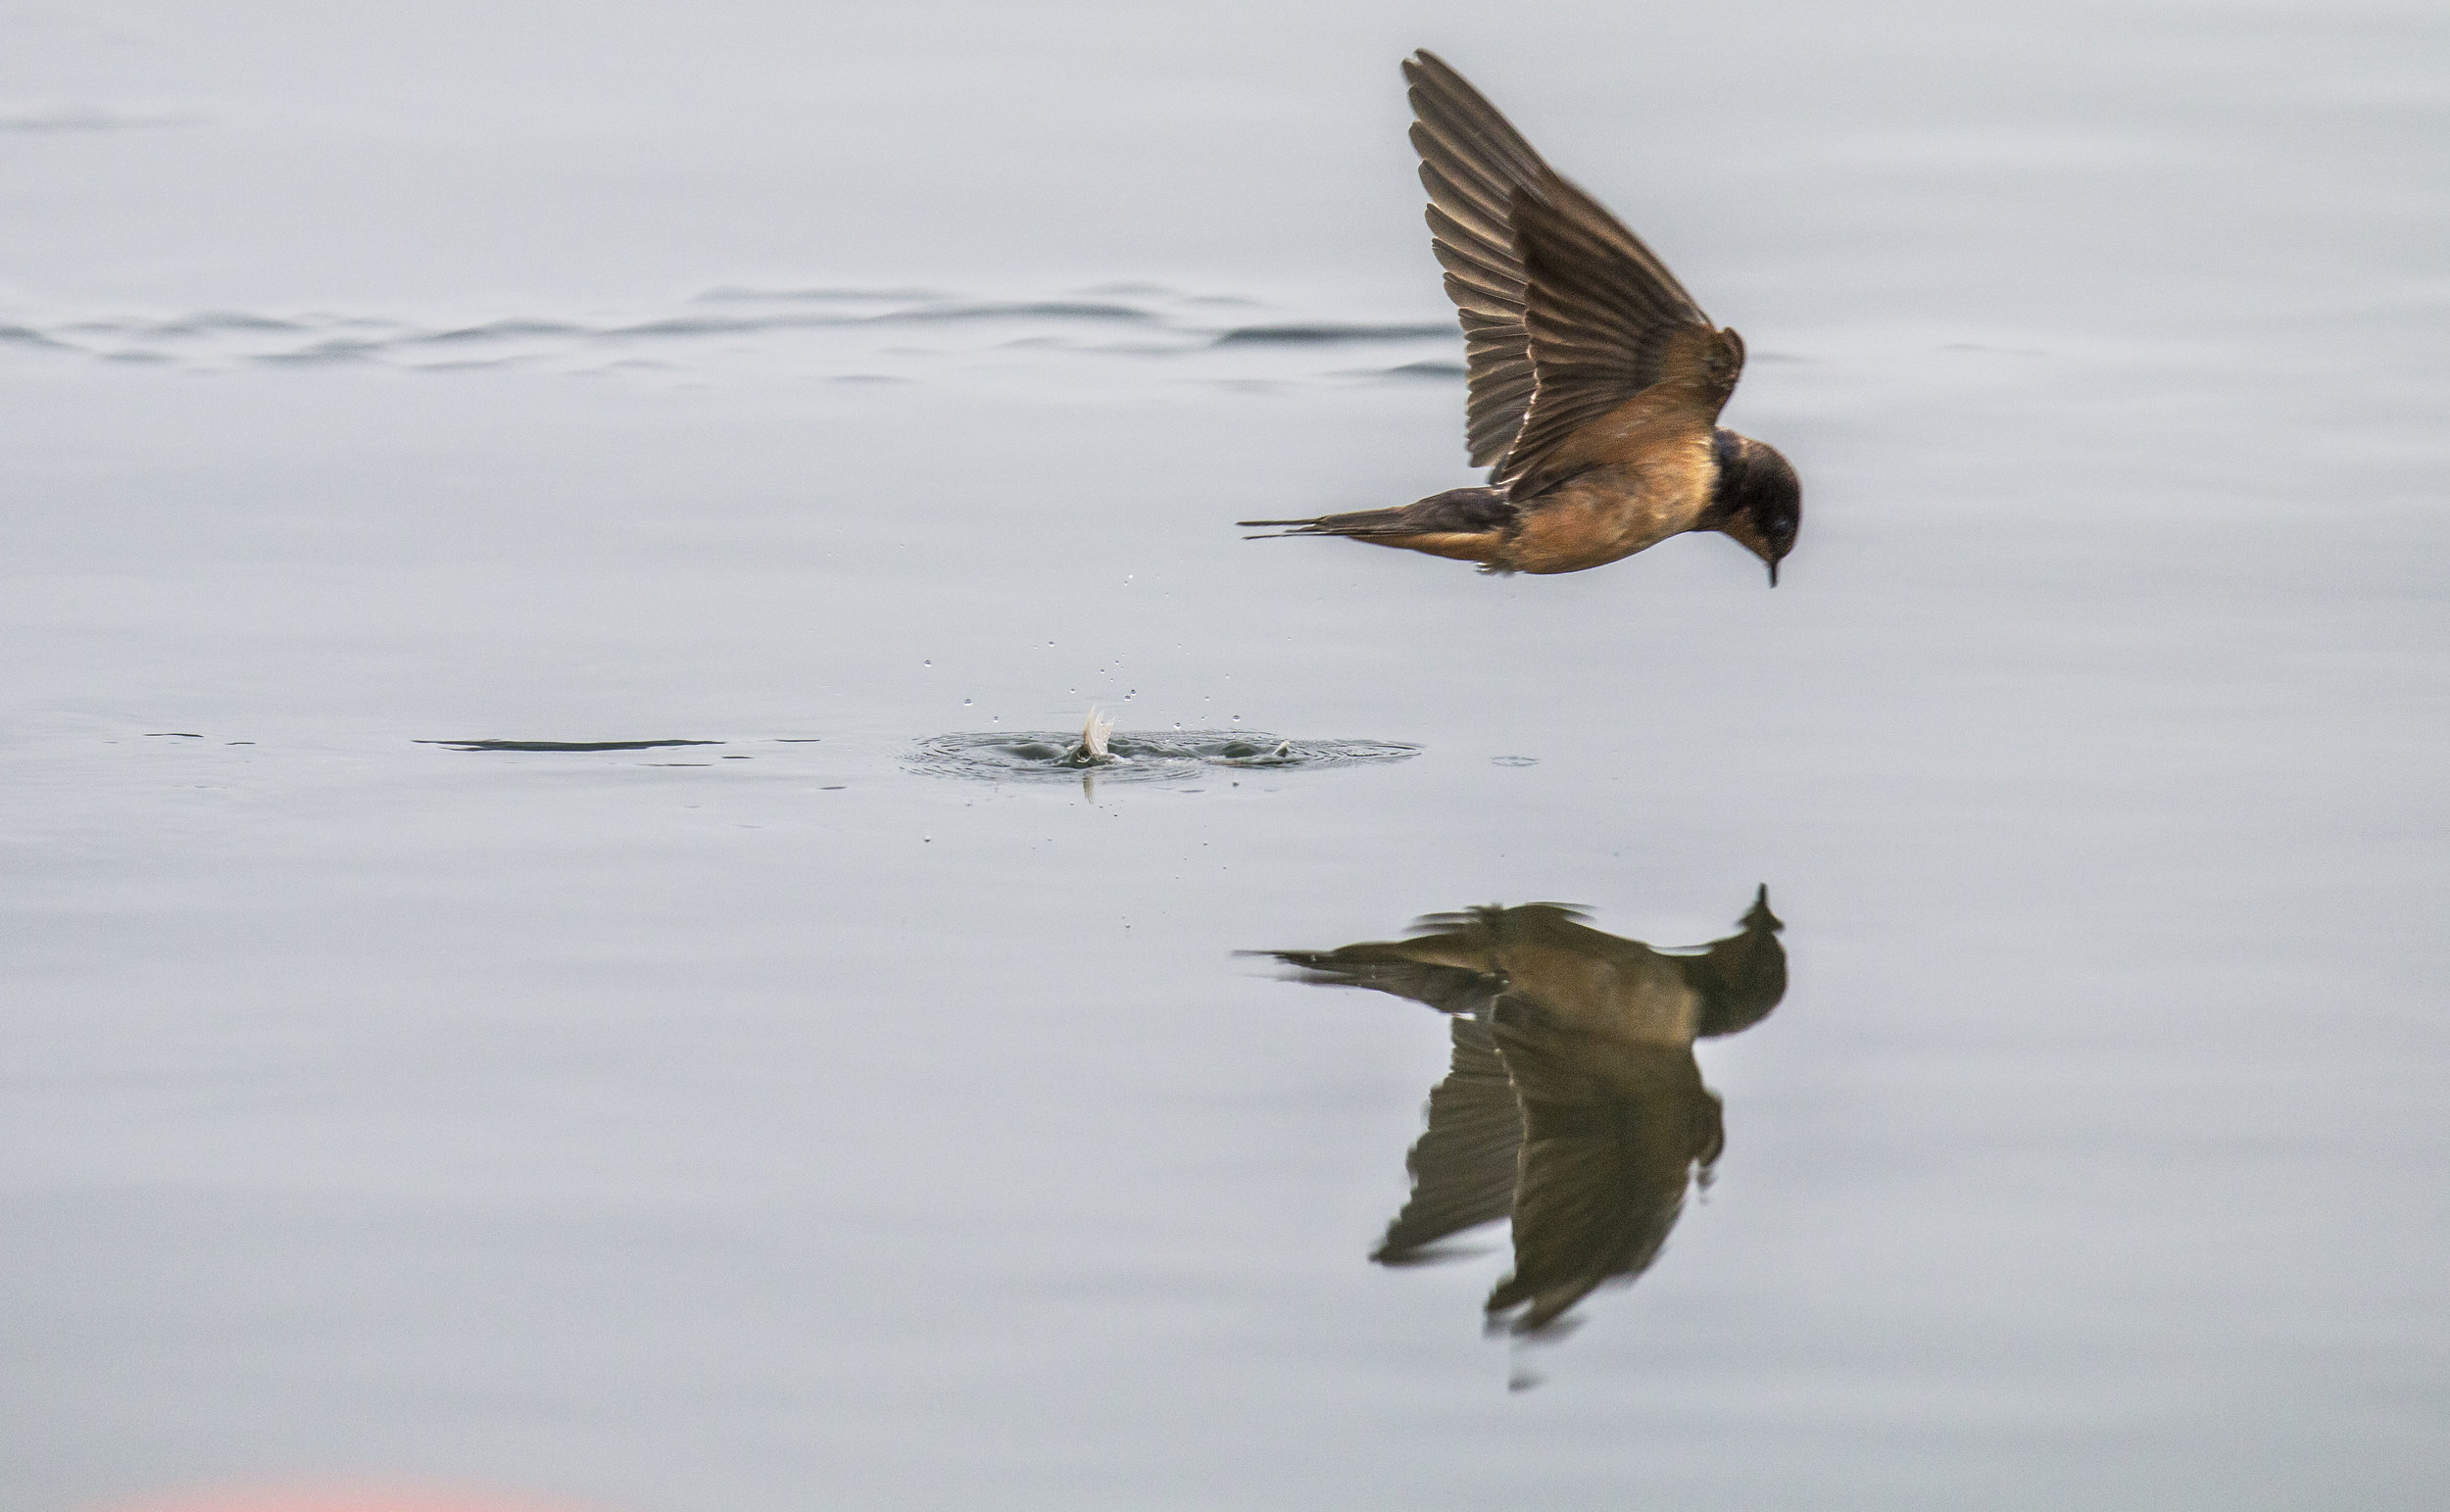  A barn swallow skims by the water of Dexter Lake as it attempts to snatch up a feather floating on the lakes surface. Barn swallows fly much lower then other species, coming within inches of ground or water to catch flying insects and then eat them 